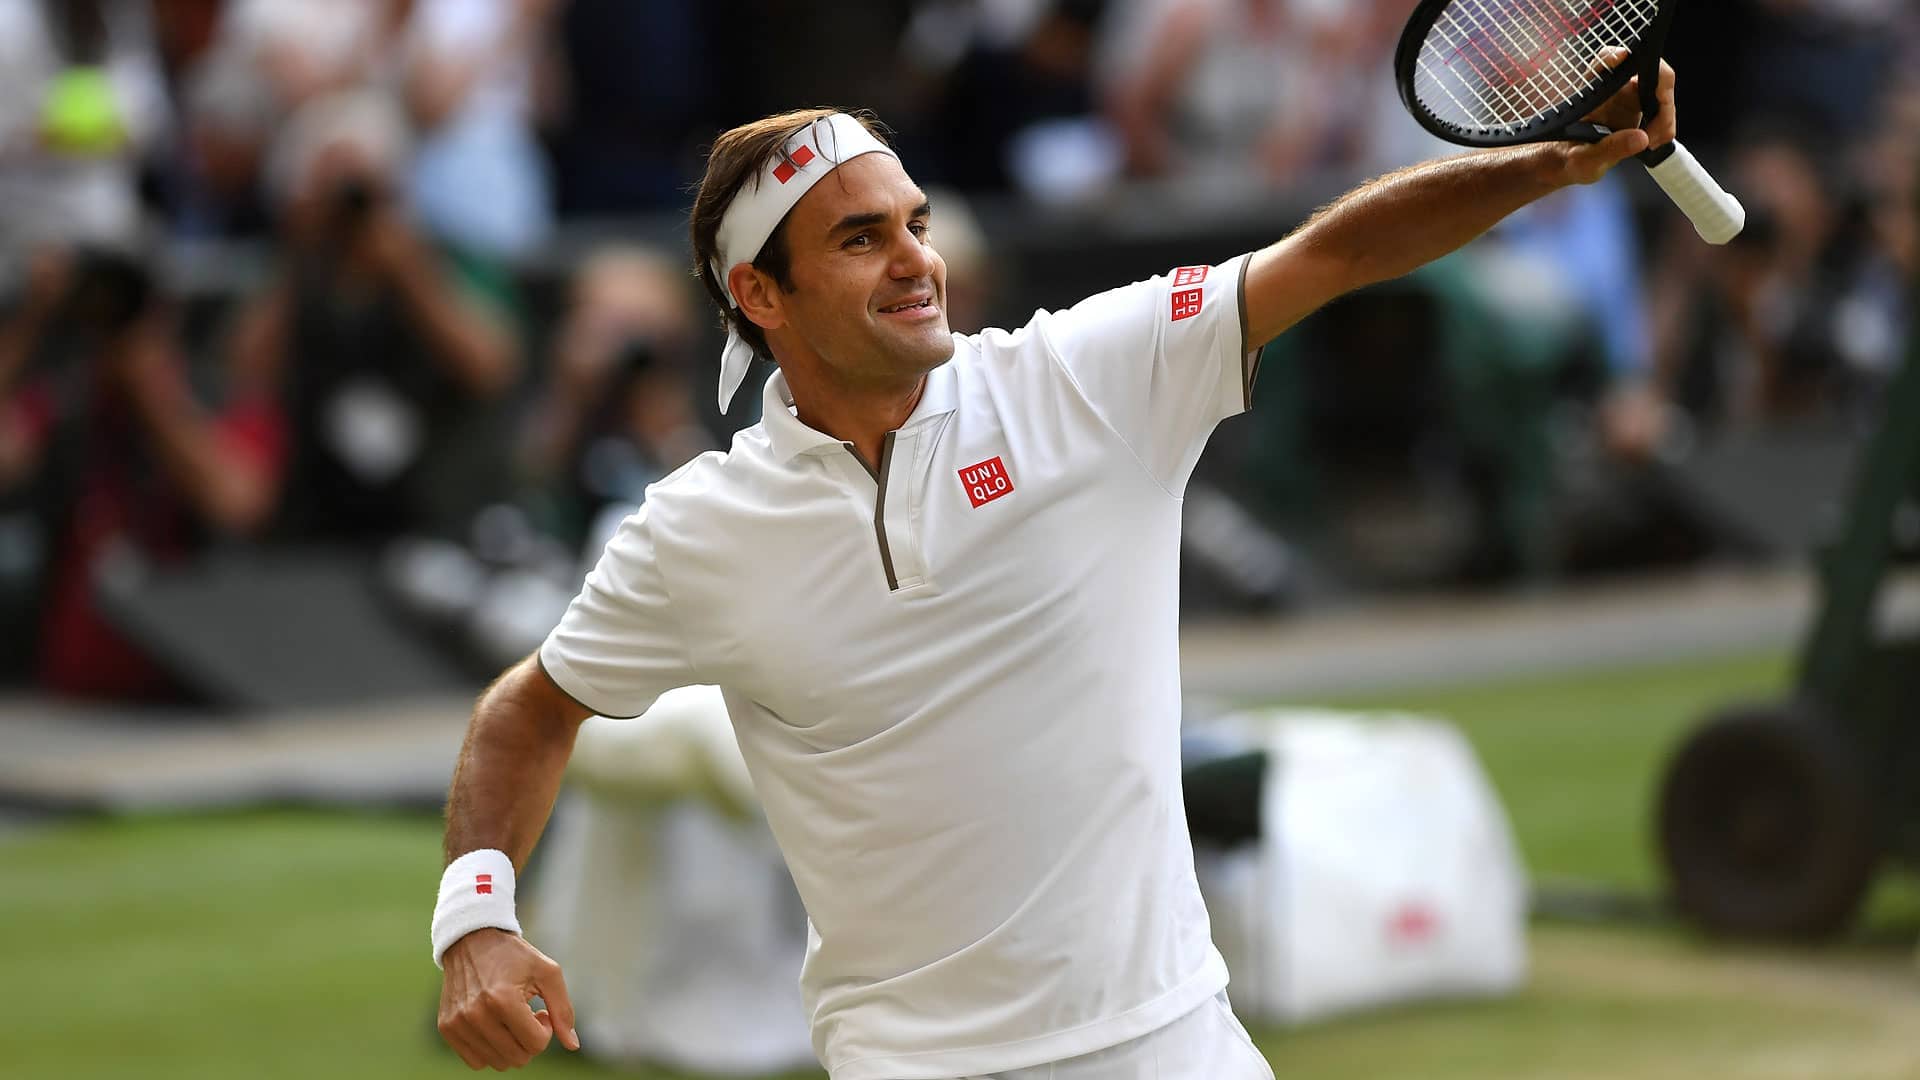 Roger Federer celebrates beating Rafael Nadal on Friday at Wimbledon, where he's attempting to capture a record-extending ninth trophy.